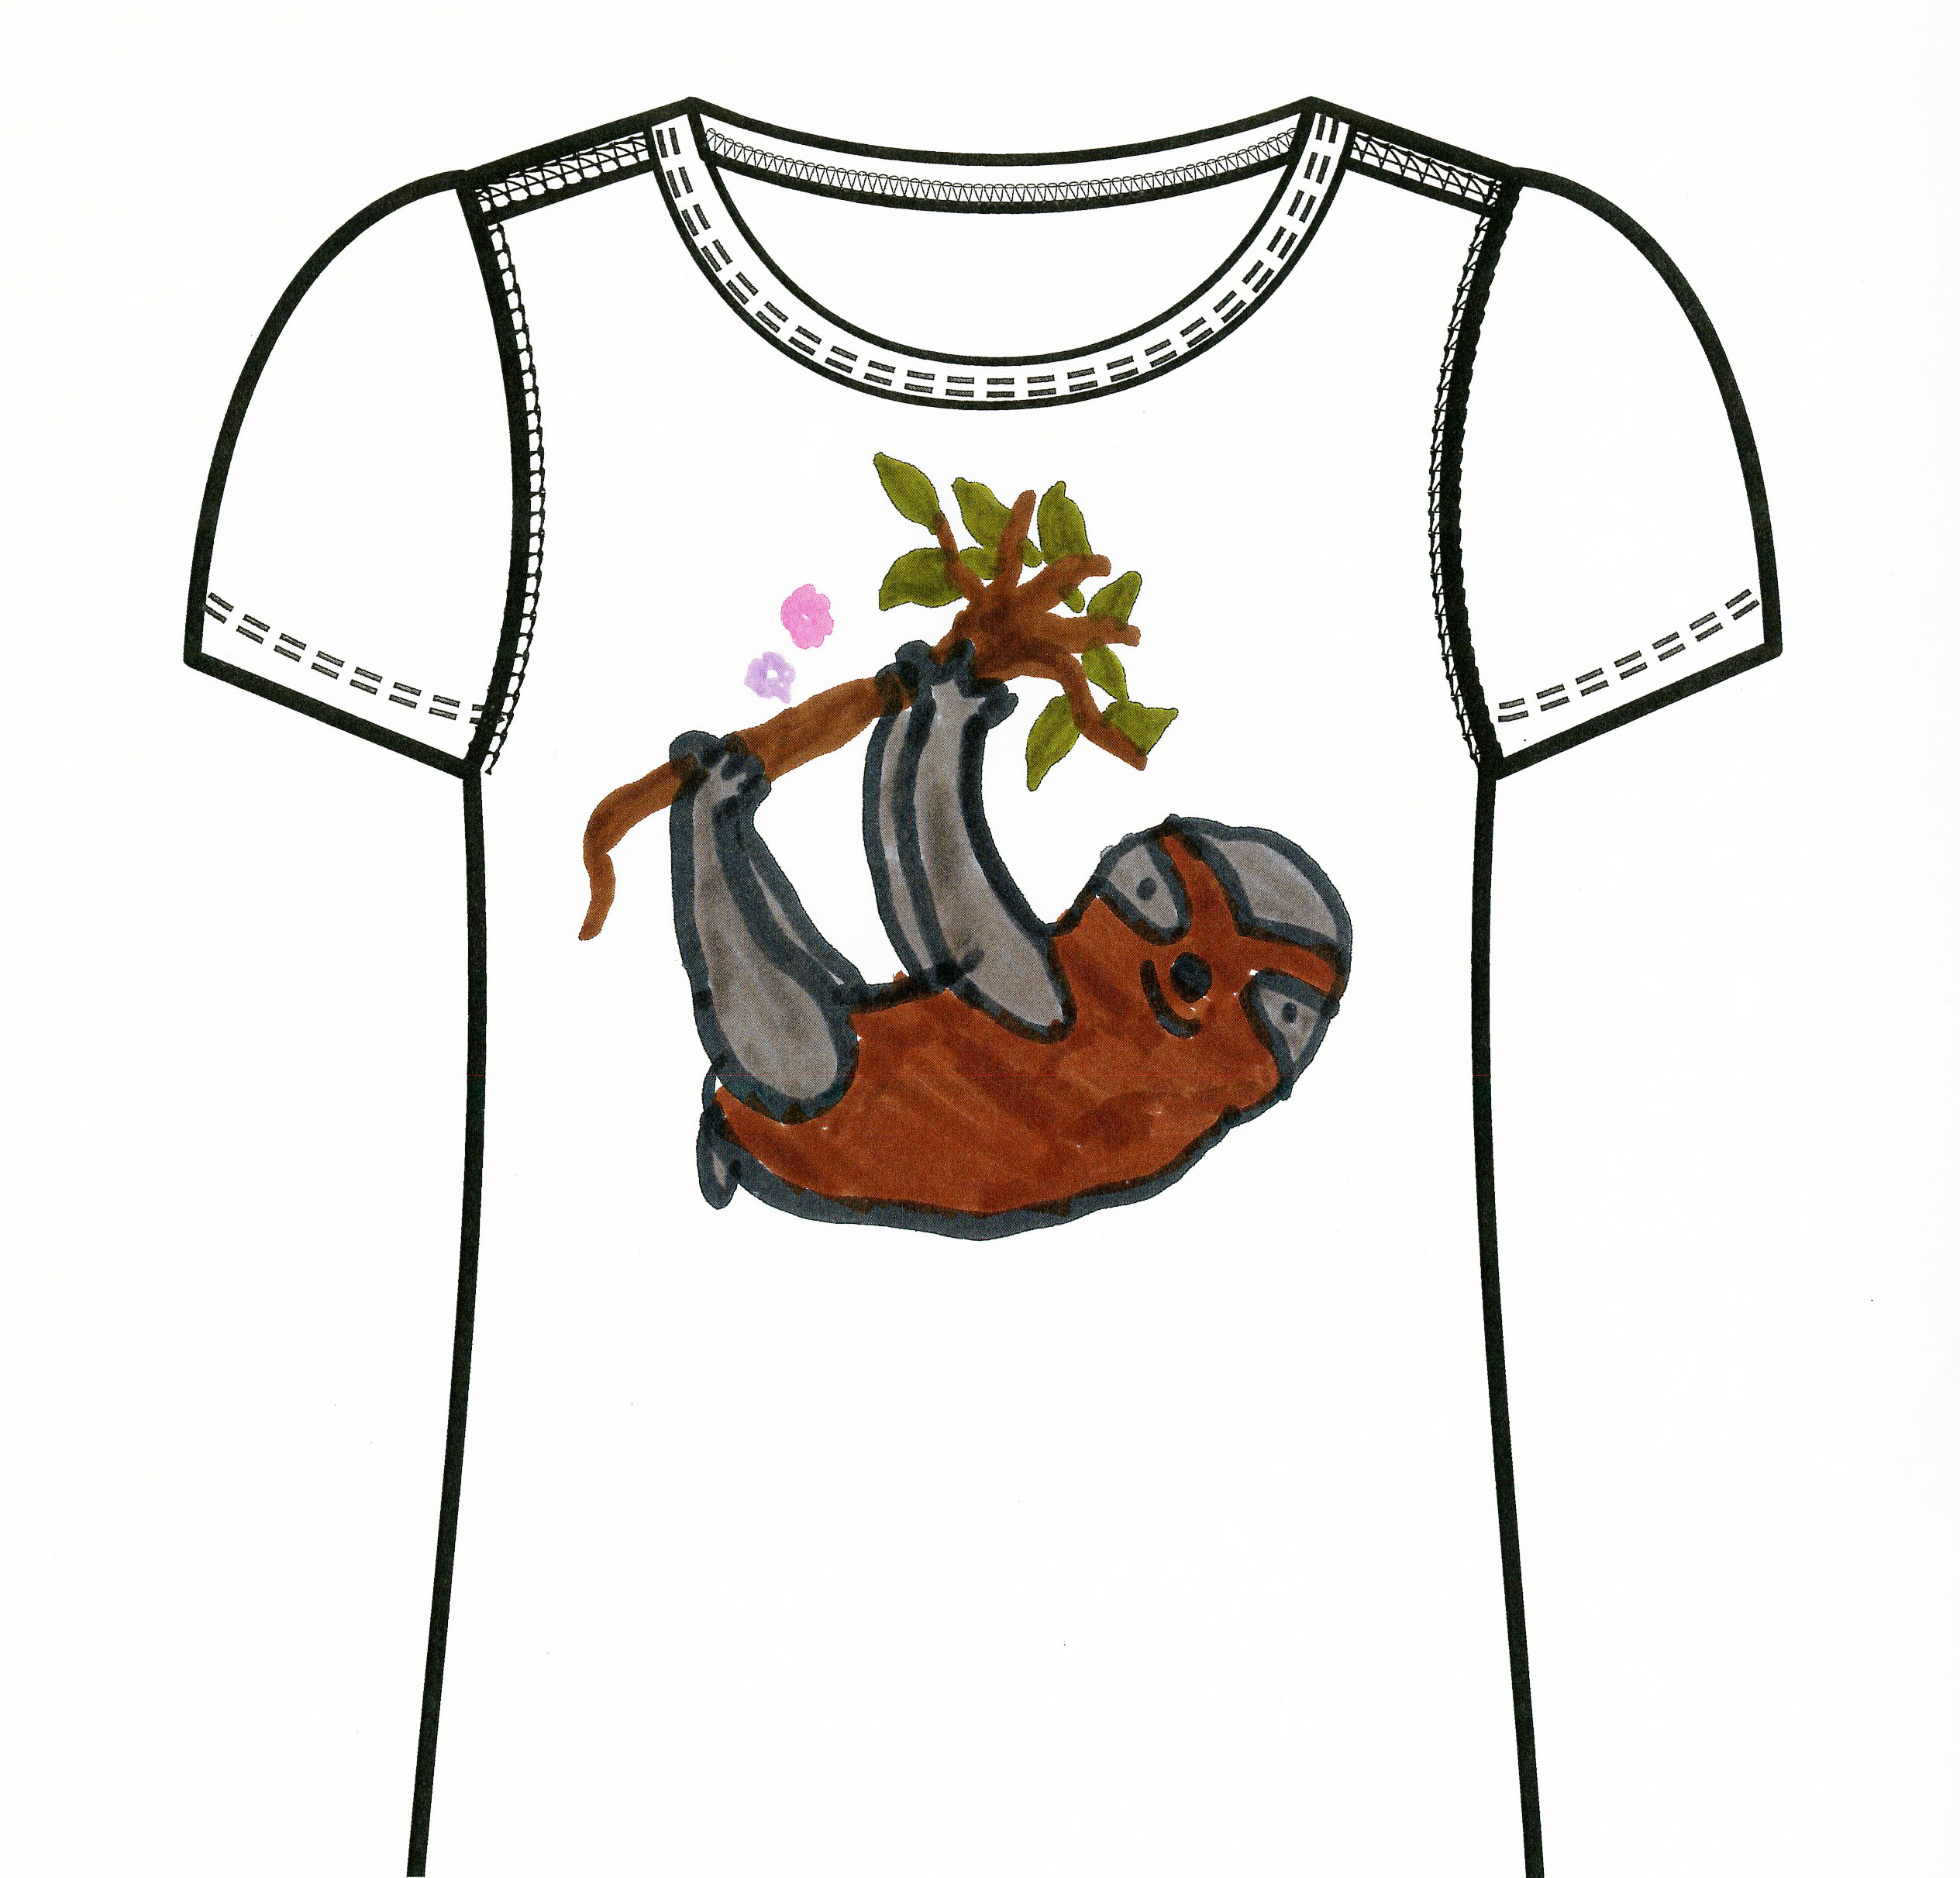 An illustration of a white t-shirt with a brown and gray sloth hanging from a tree branch with green leaves